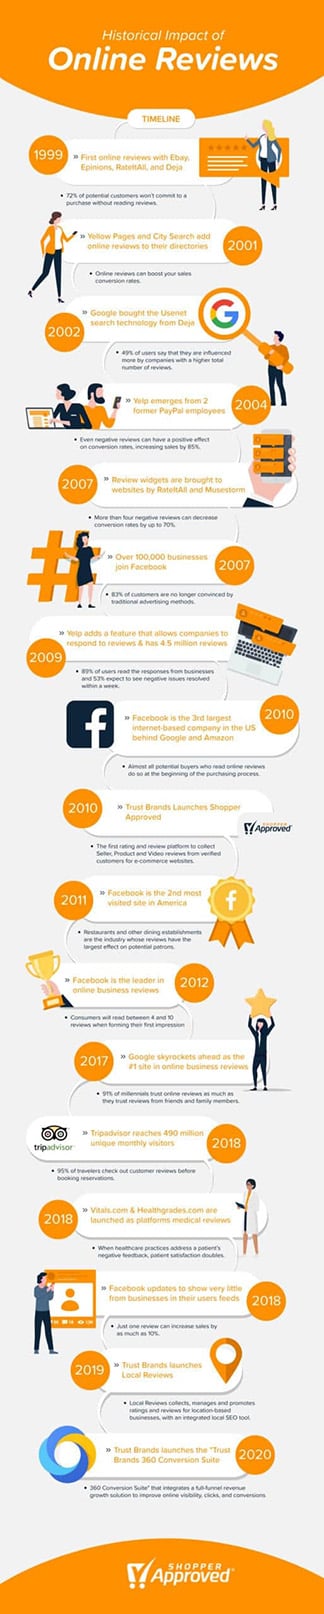 History of Online Reviews